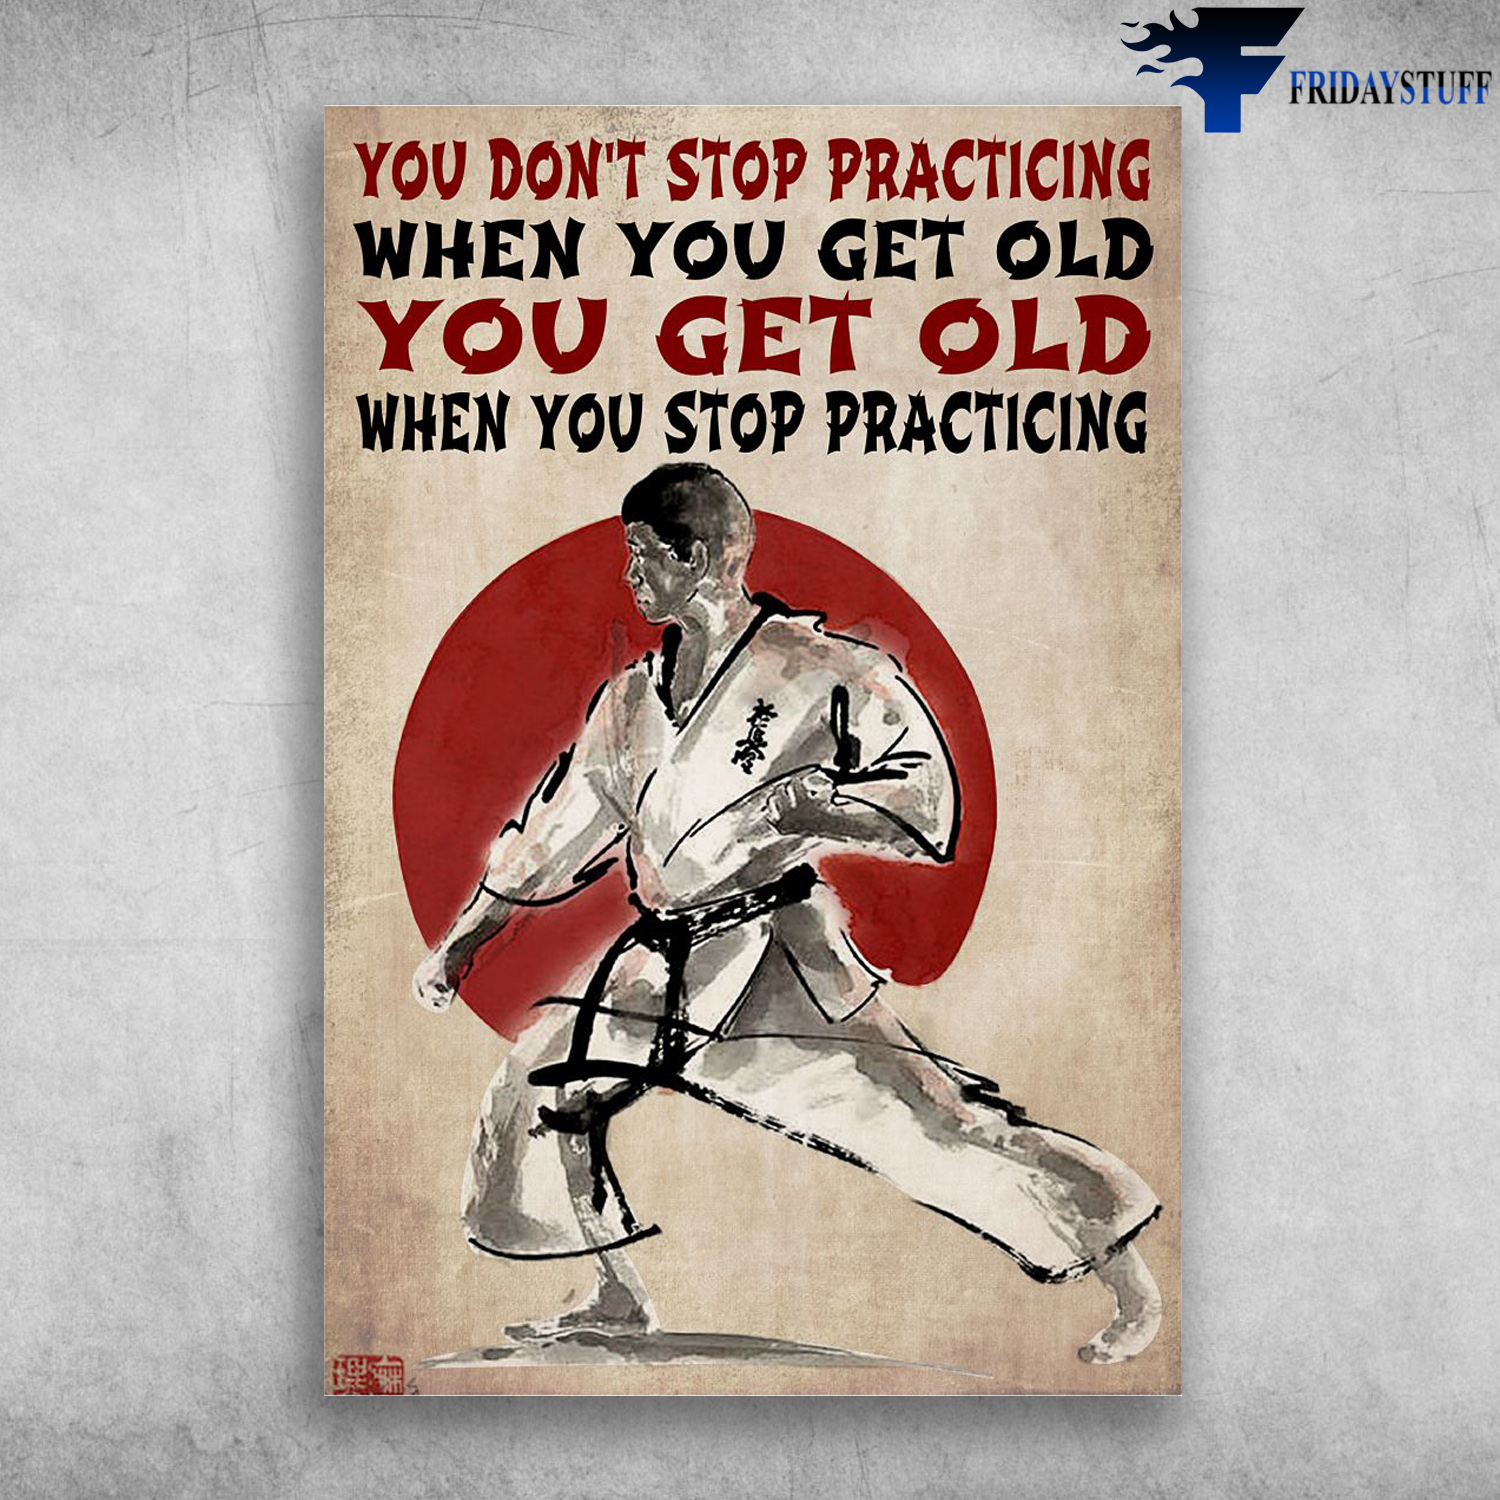 Karate Man - You Don't Stop Practicing When You Get Old, You Get Old When You Stop Practicing